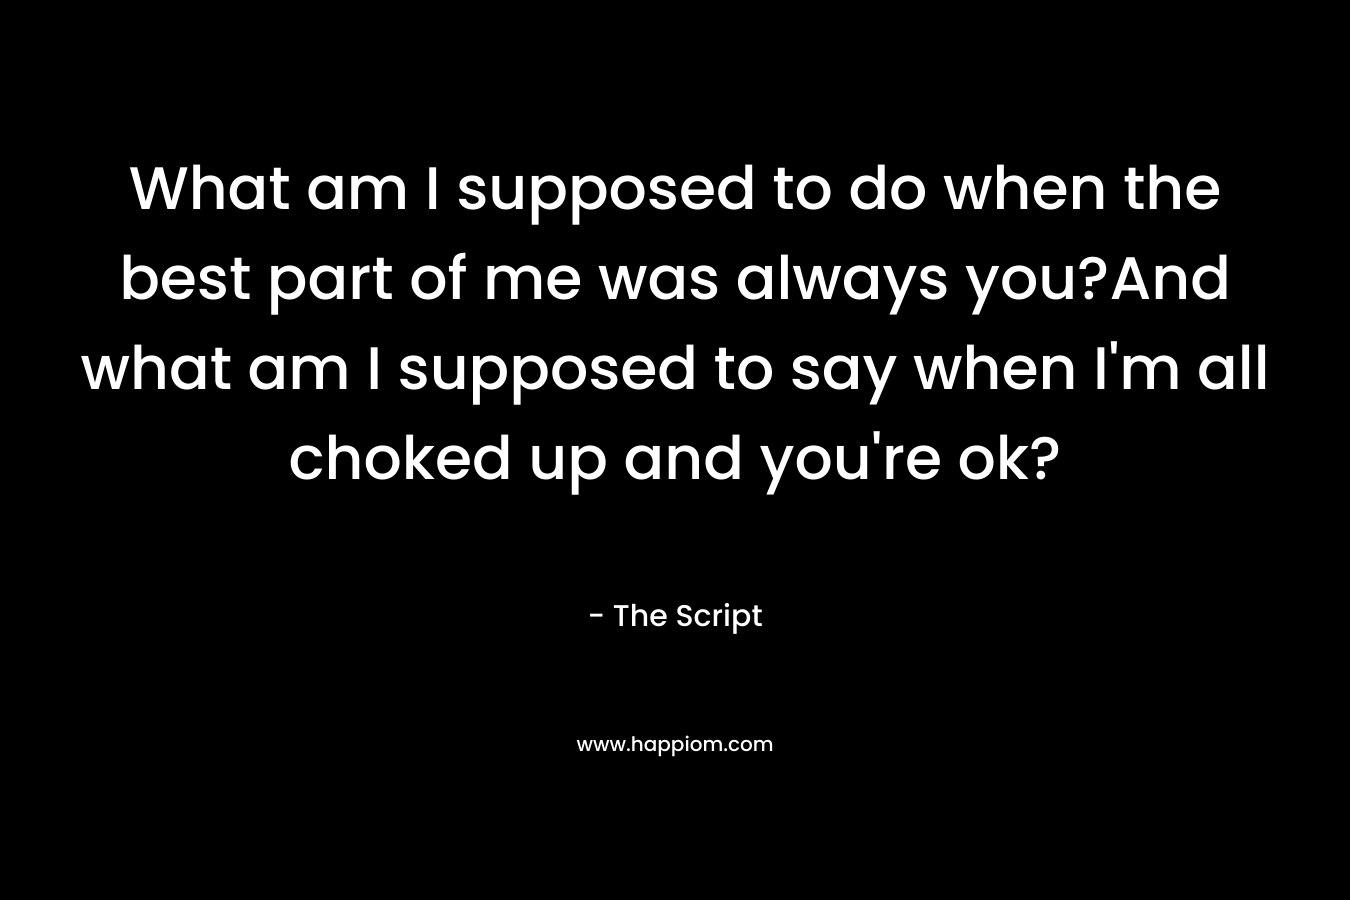 What am I supposed to do when the best part of me was always you?And what am I supposed to say when I’m all choked up and you’re ok? – The Script